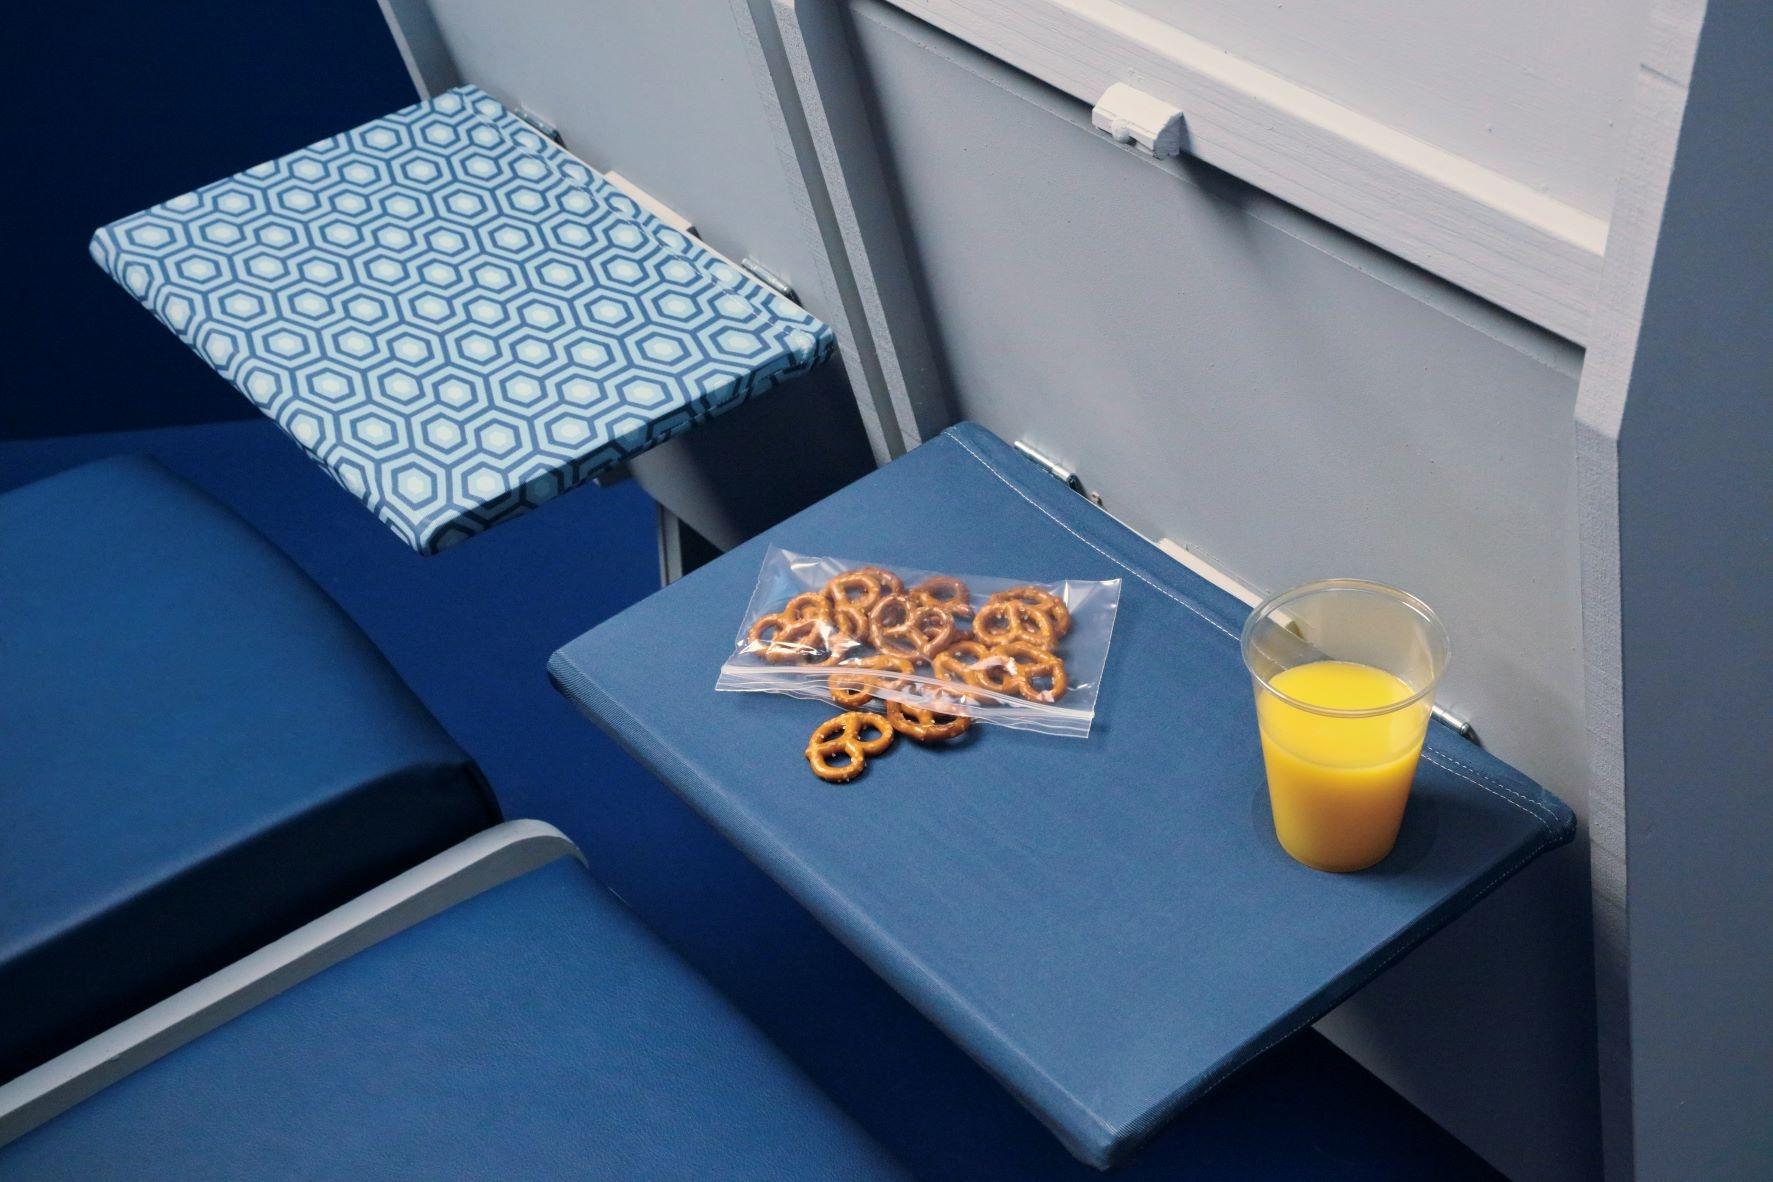 Airplane Pockets are a stretchable cover for airplane tray tables that